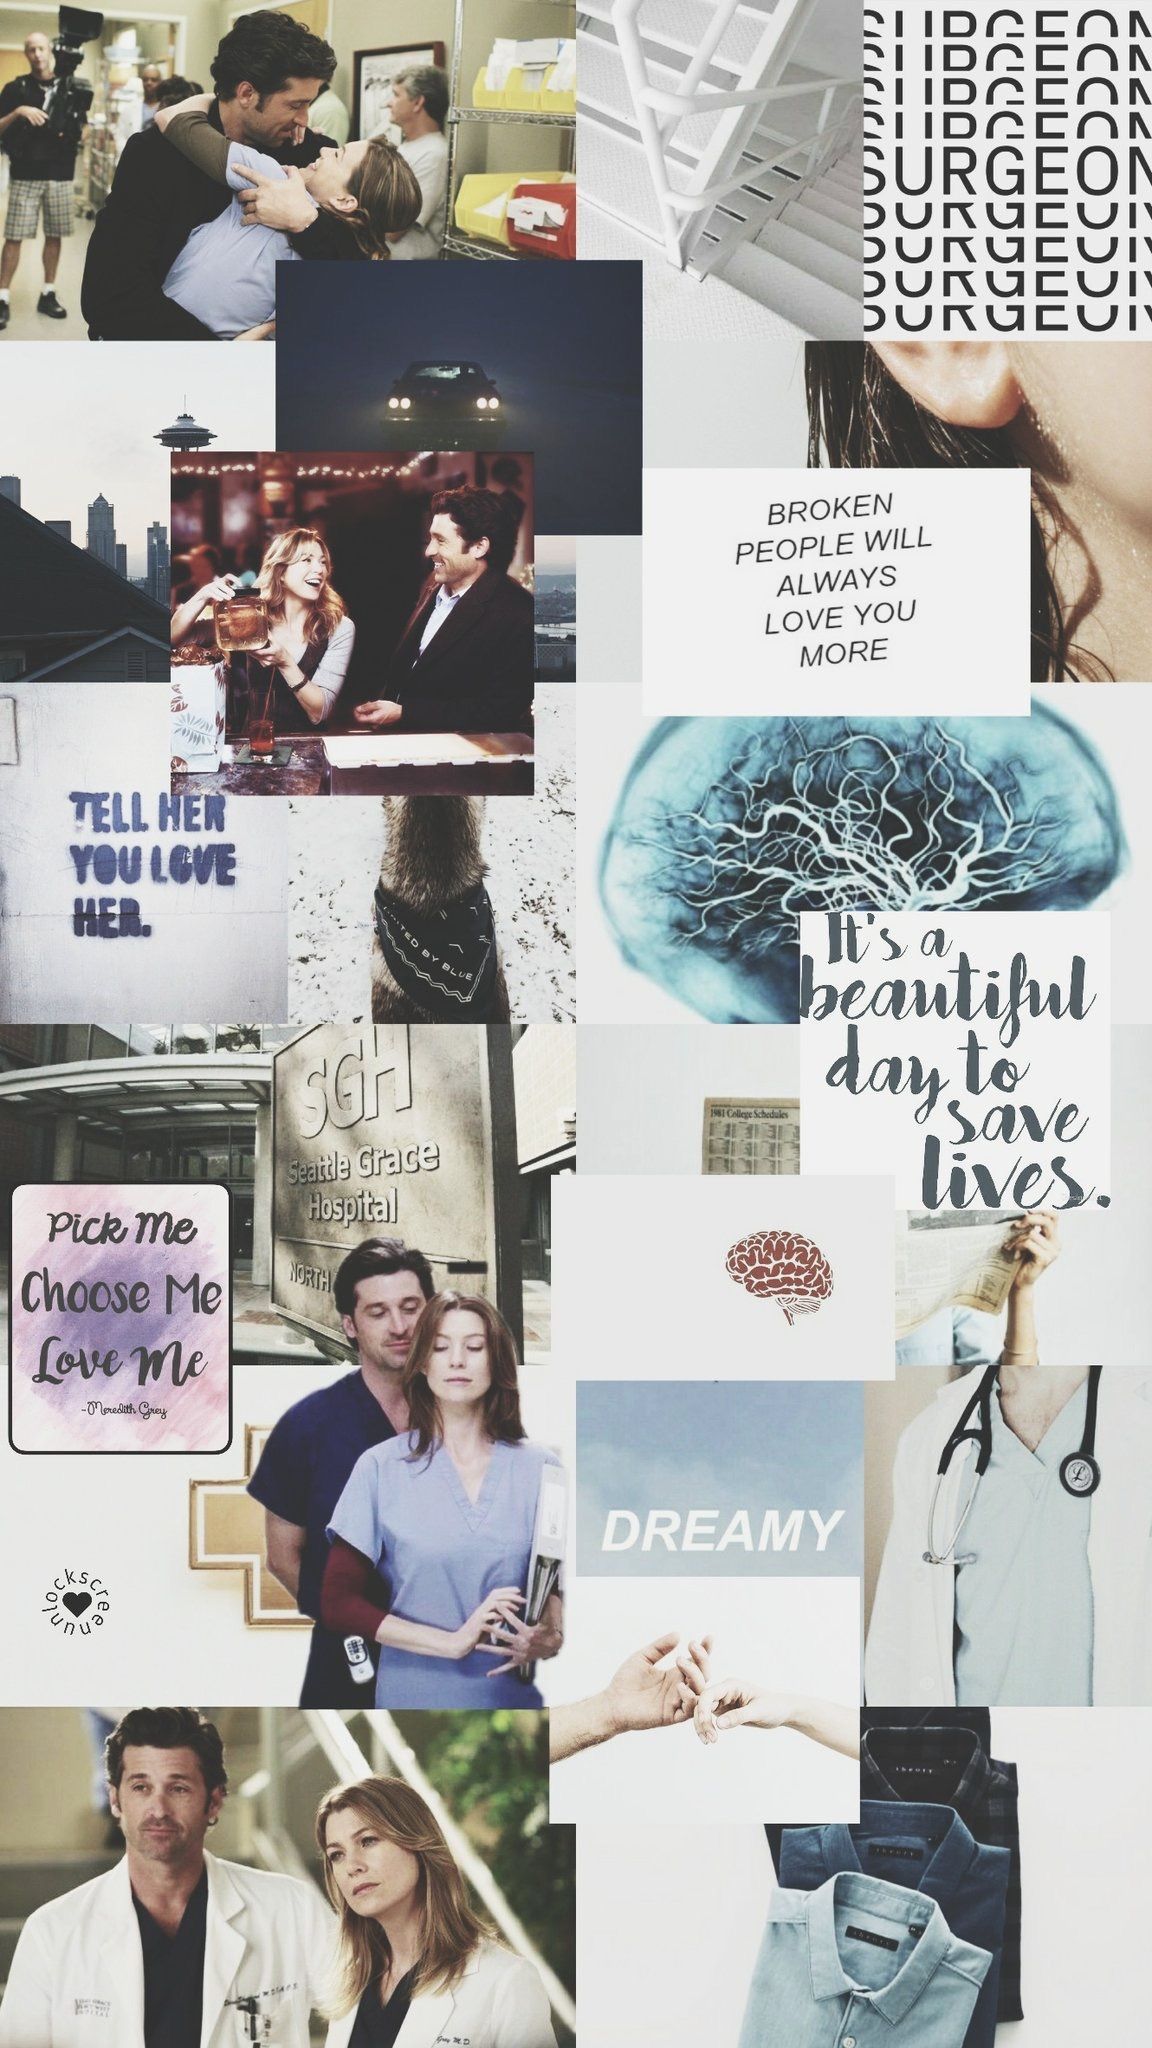 A collage of Grey's Anatomy characters and quotes - Grey's Anatomy